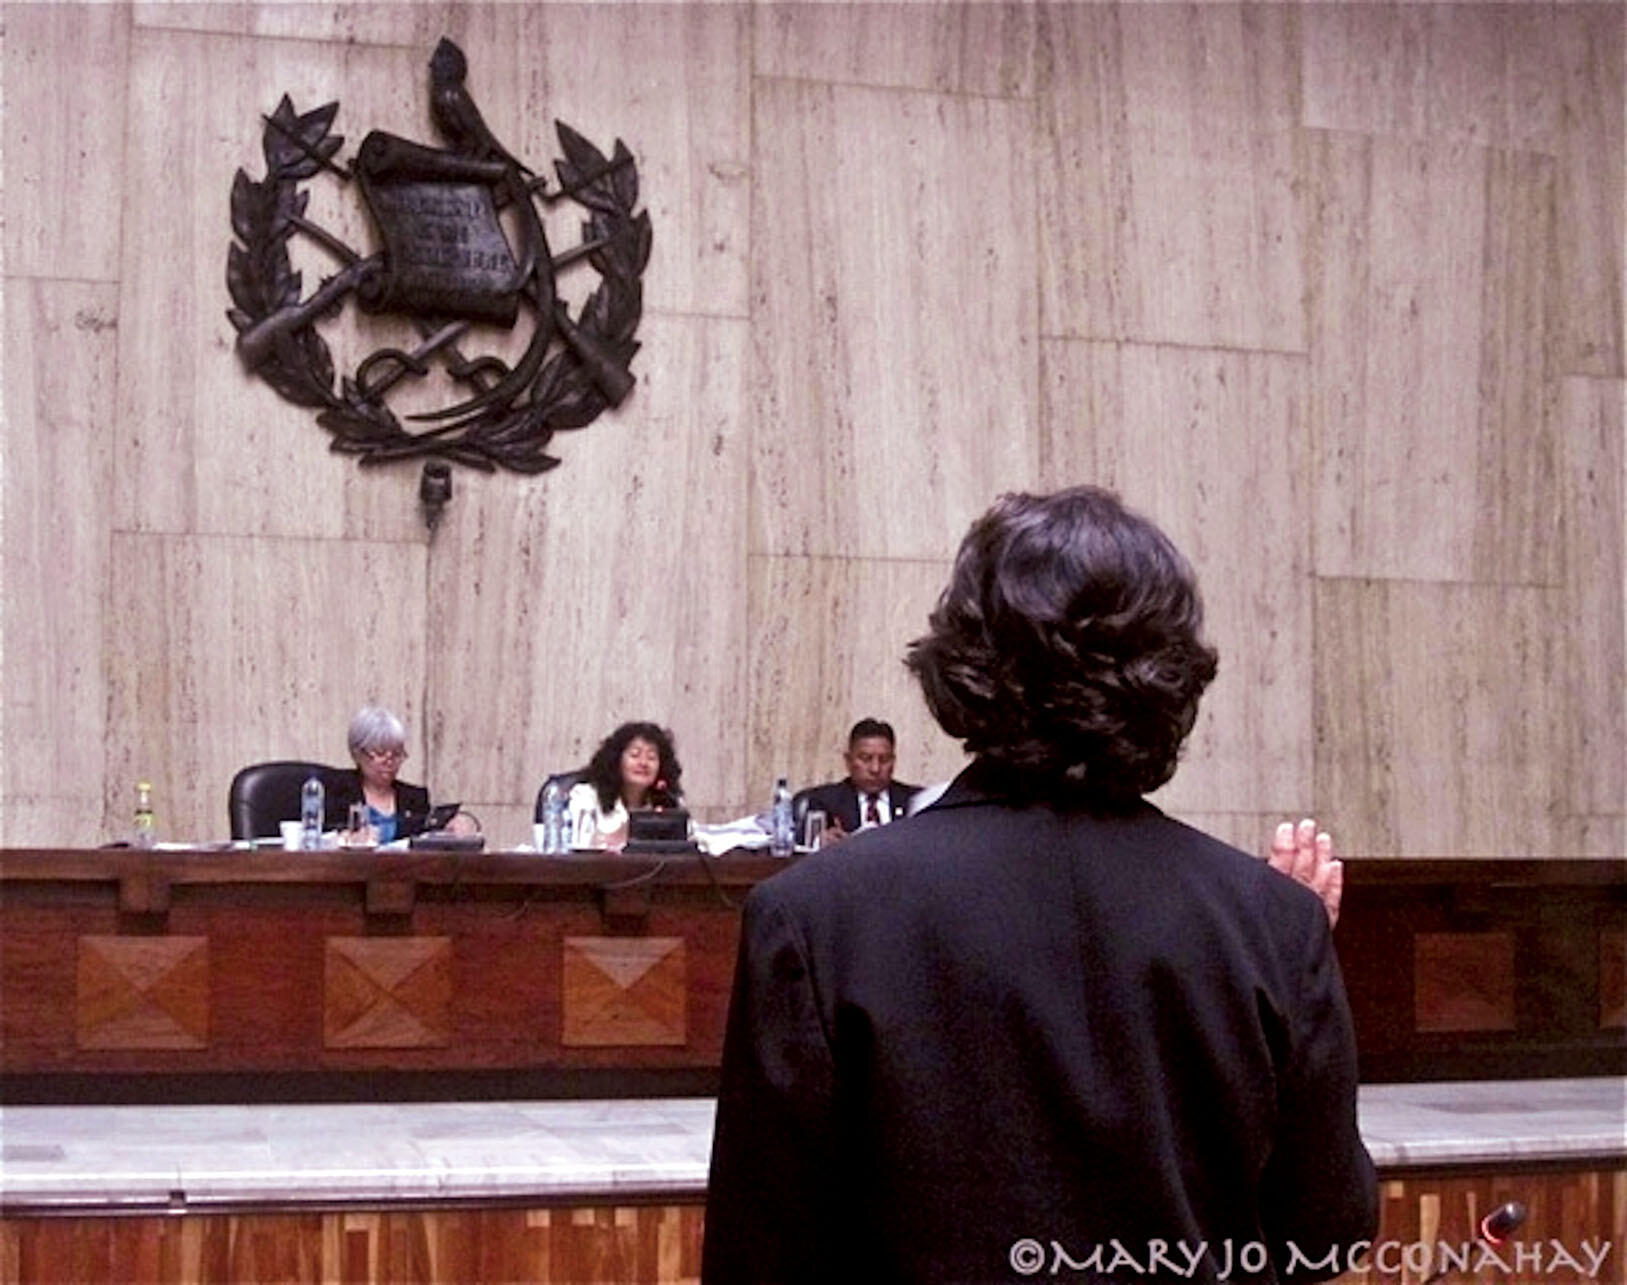 Beatriz Manz is sworn in at the Ríos Montt trial in front of (from left) Justices Patricia Bustamante, Yassmin Barrios, and Pablo Xitumul. (Photo by Mary Jo McConahay.)